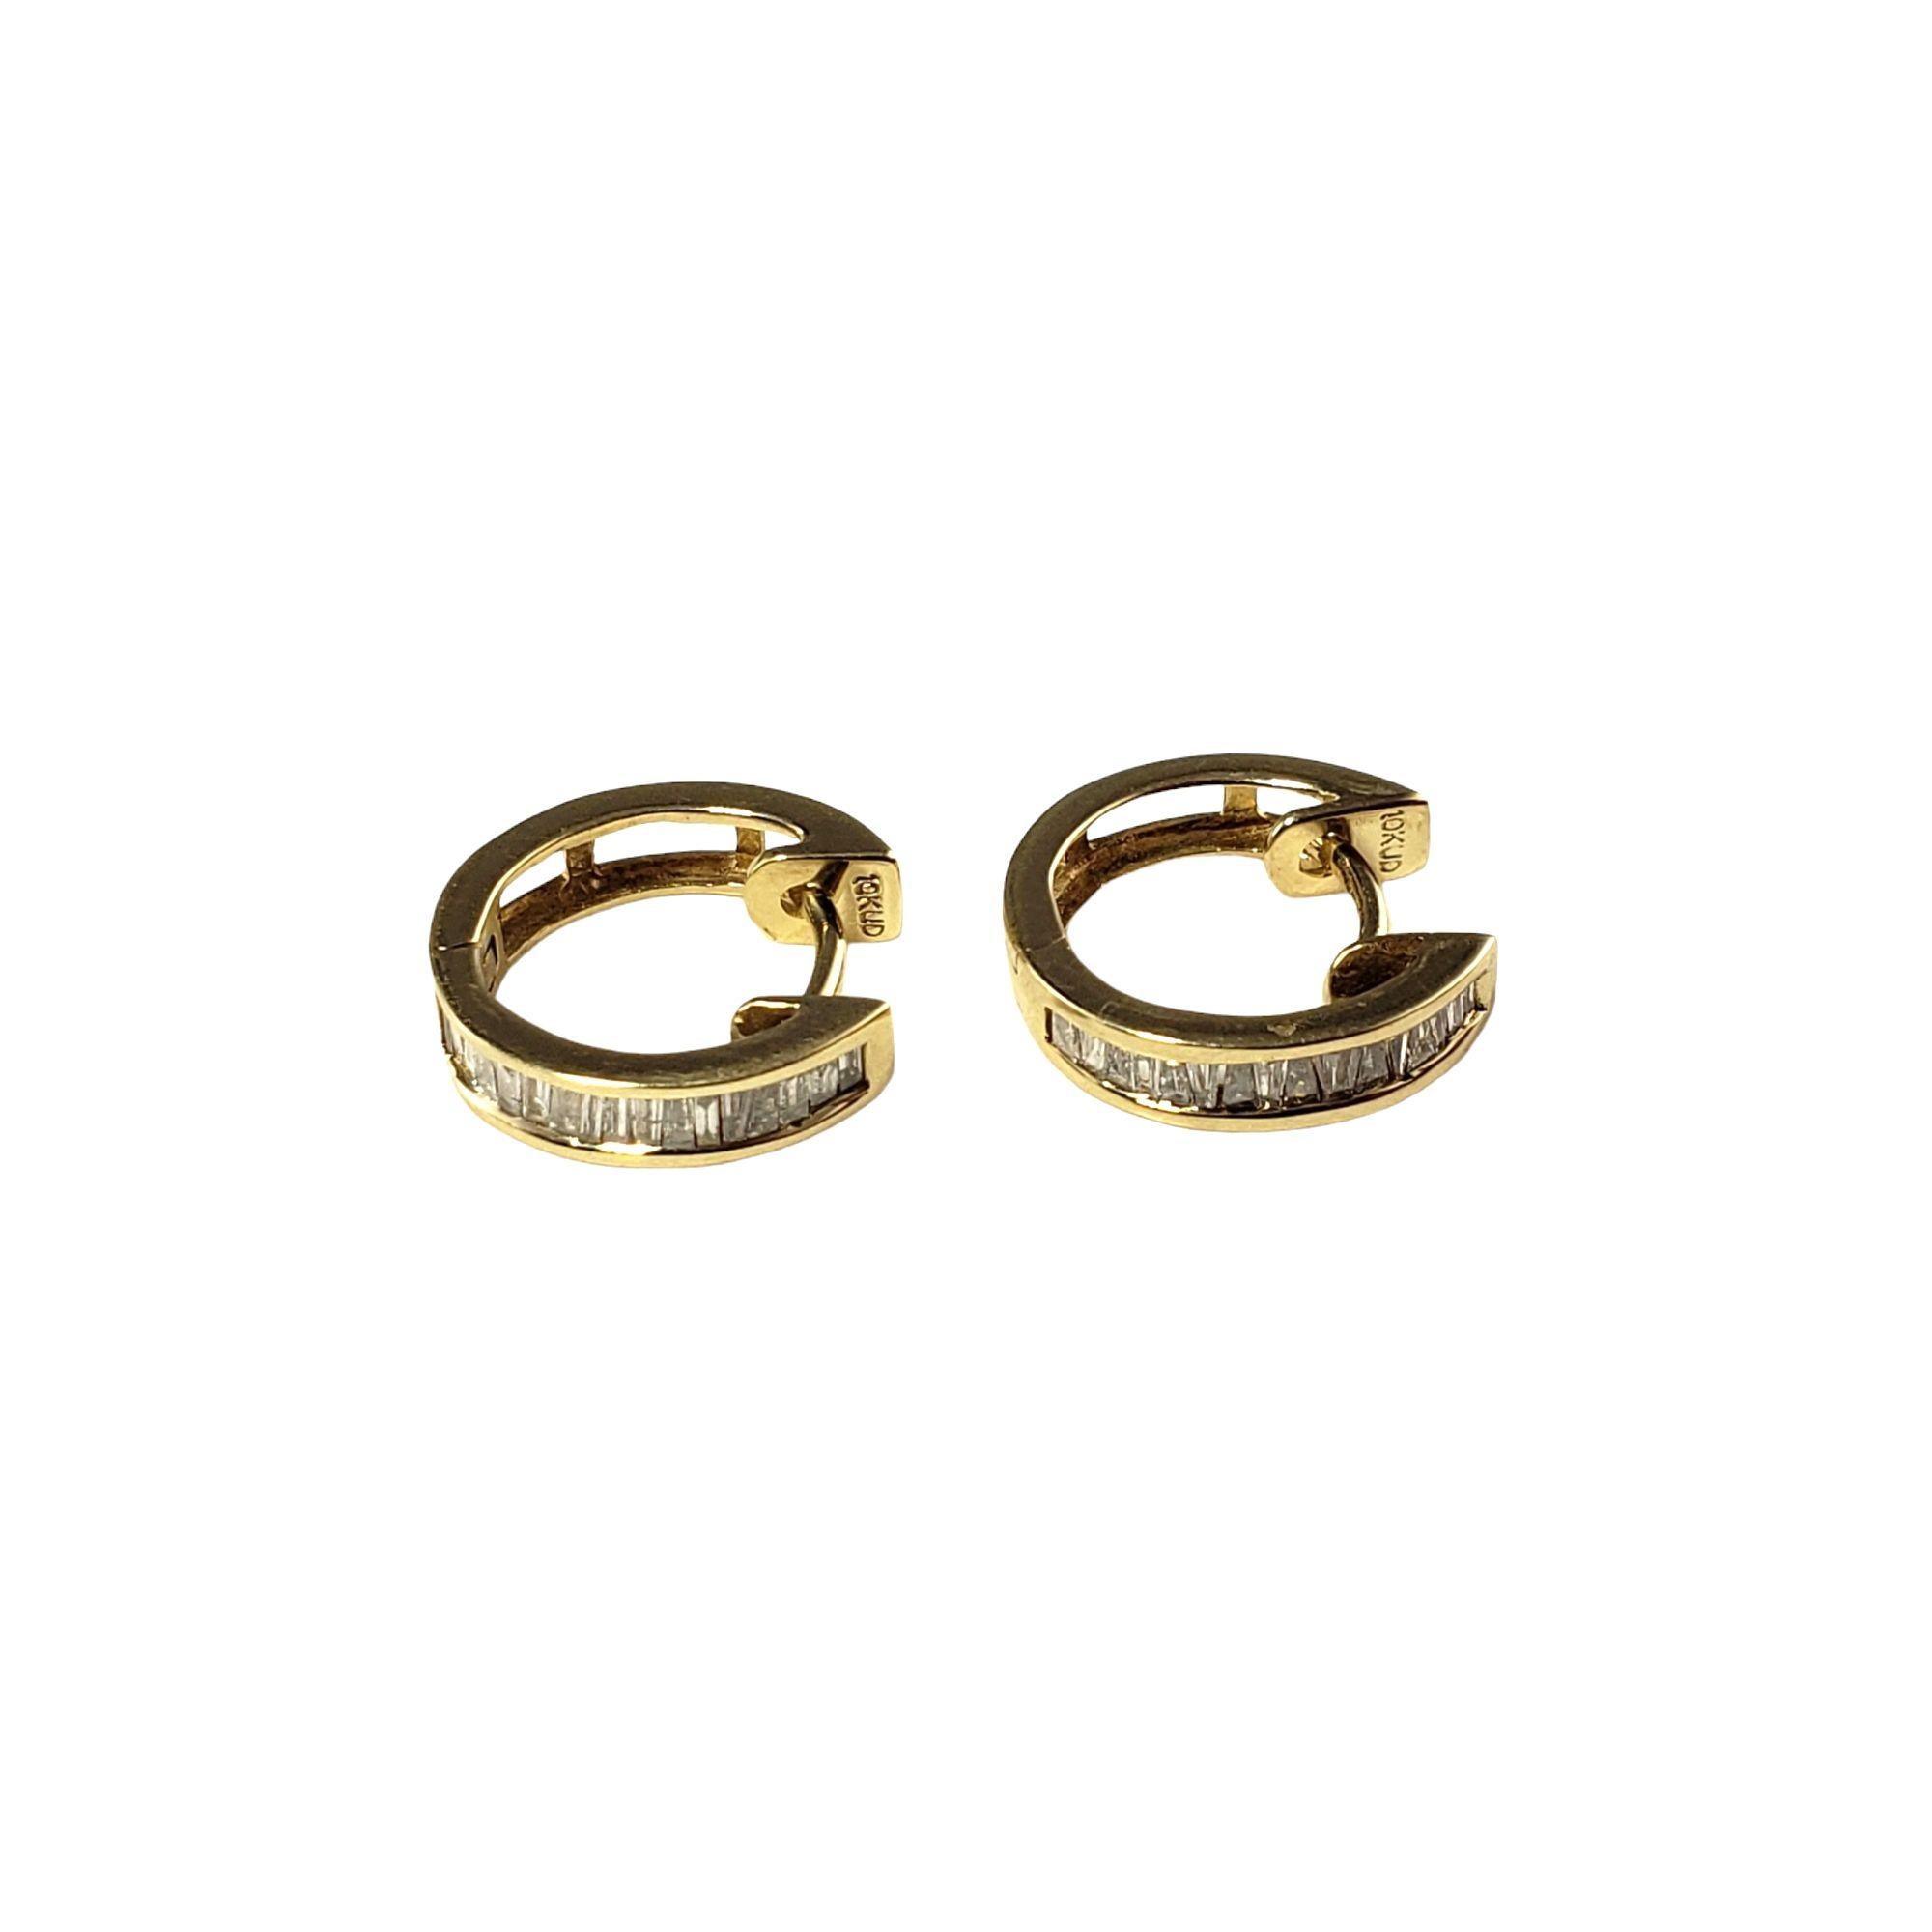 Vintage 10 Karat Yellow Gold and Diamond Hoop Earrings-

These lovely hinged hoop earrings are decorated with sparkling baguette diamonds set in classic 10K yellow gold.

Approximate total diamond weight: .48 ct.

Diamond color: I

Diamond clarity: